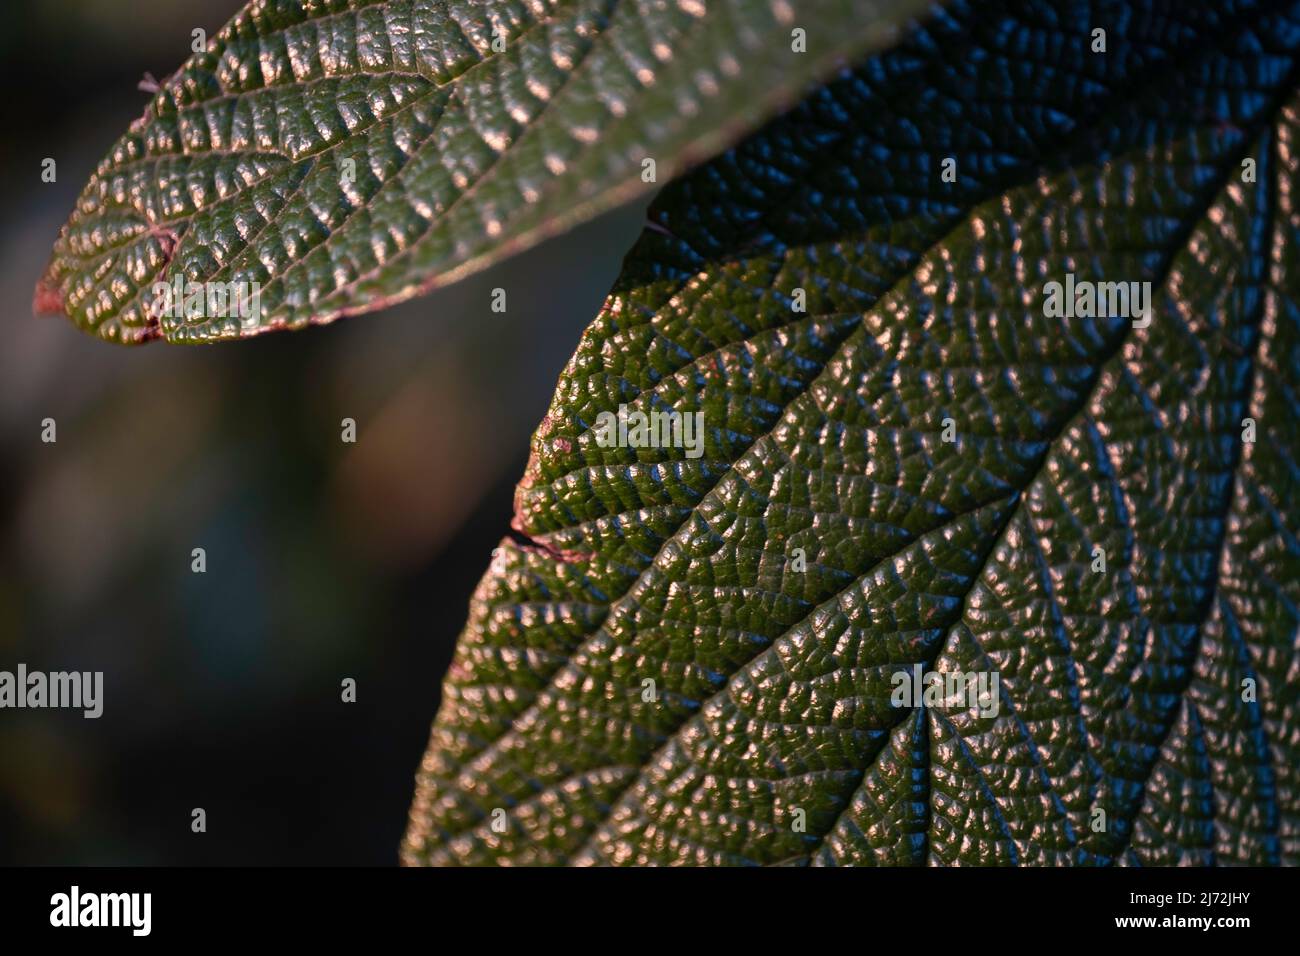 Close-up of the leathery leaves of the Viburnum rhytidophyllum in the evening sun Stock Photo